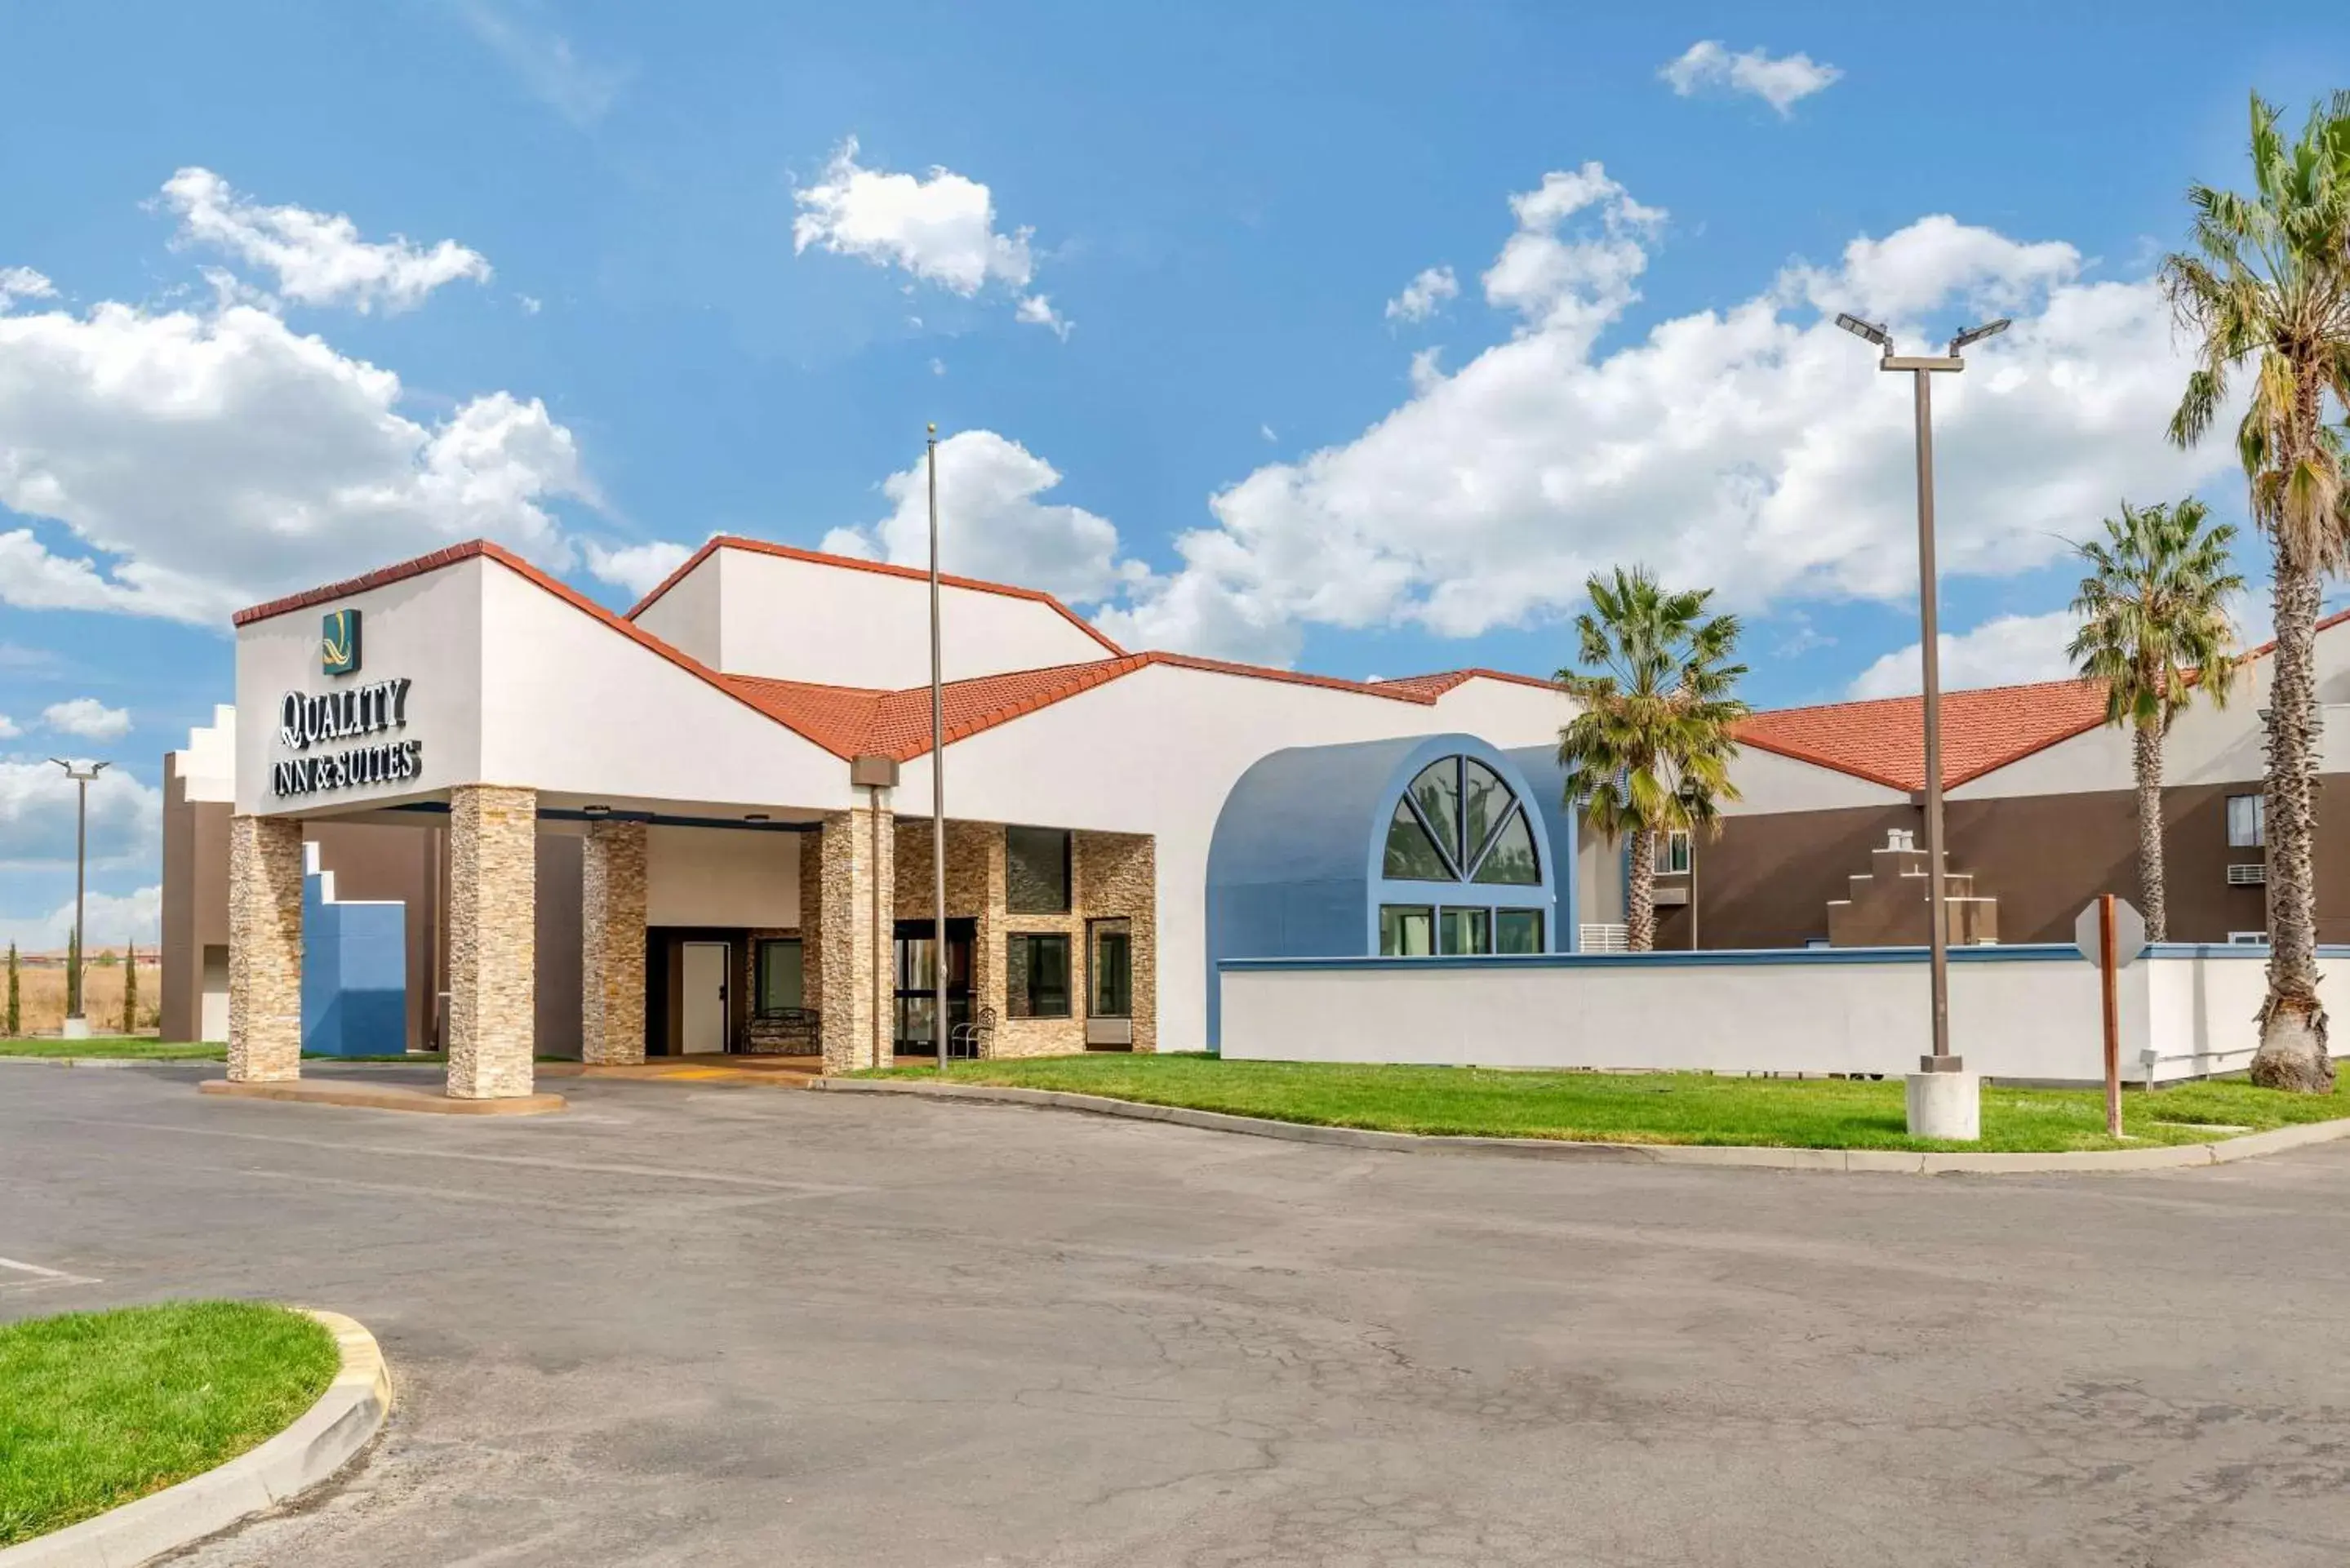 Property Building in Quality Inn & Suites Vacaville